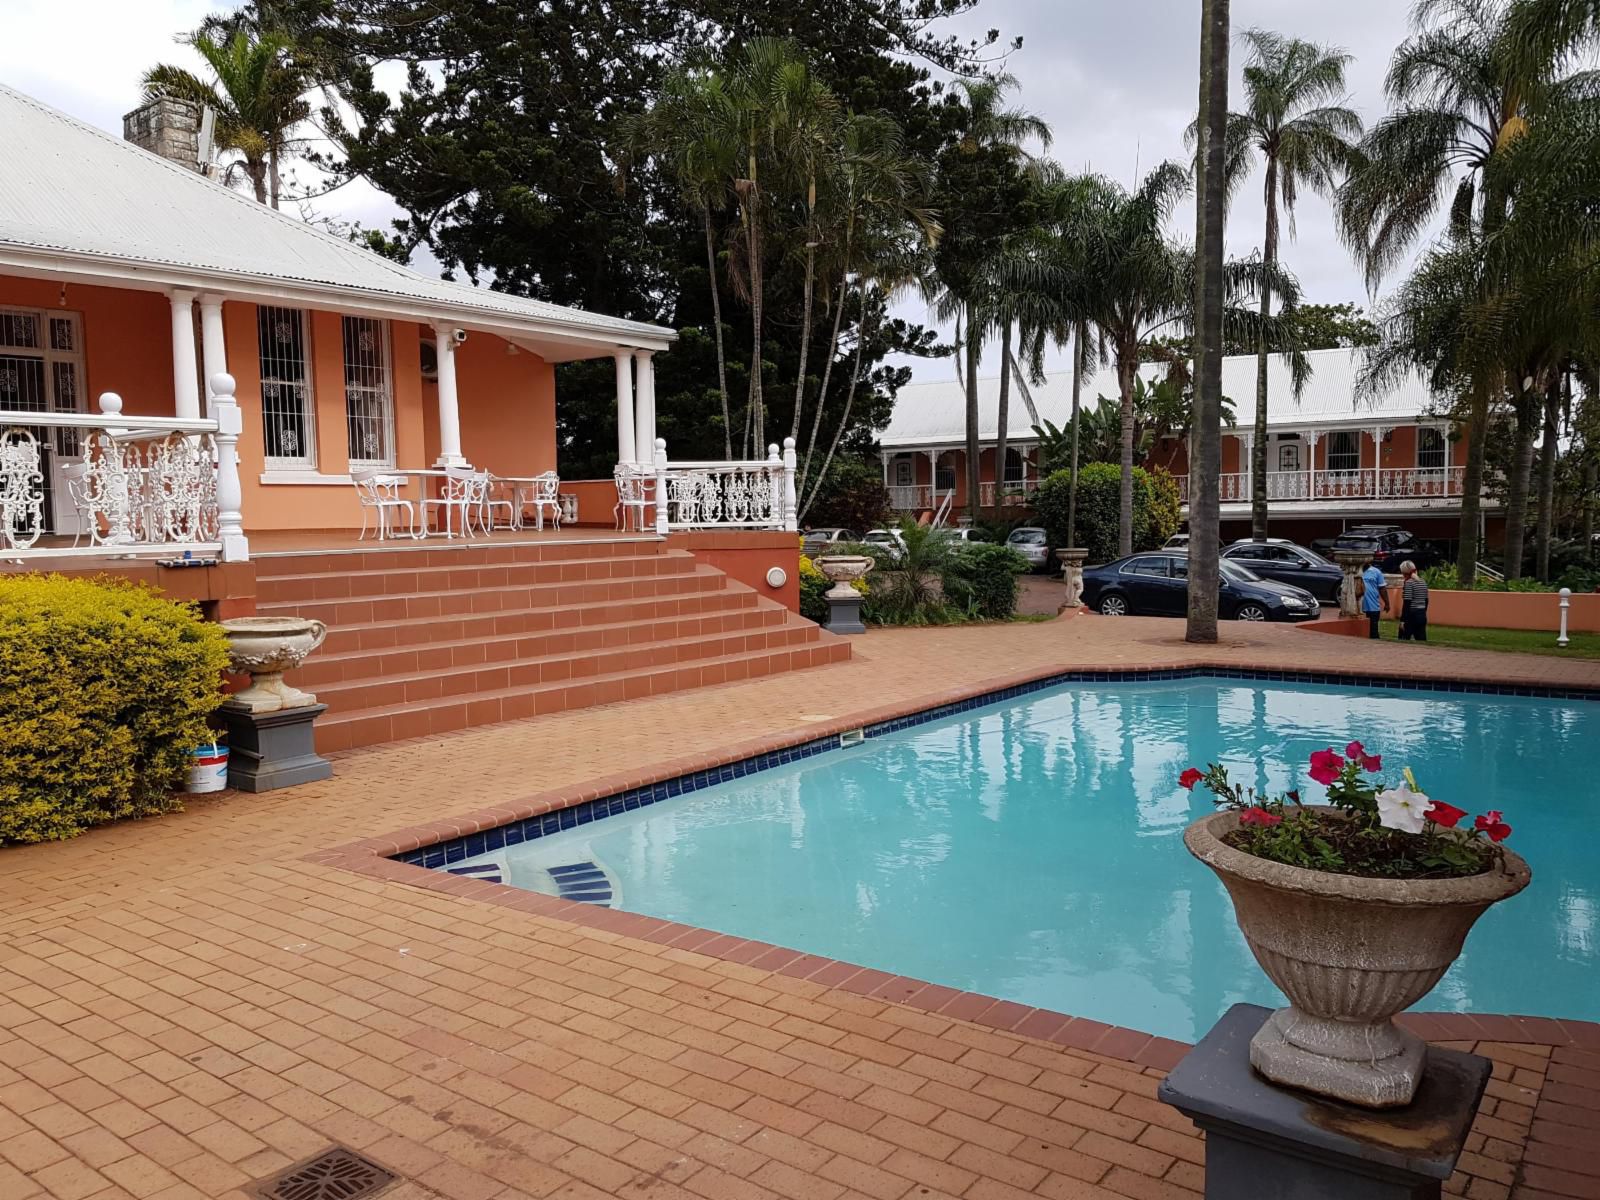 Sica S Guest House Westridge Durban Kwazulu Natal South Africa House, Building, Architecture, Palm Tree, Plant, Nature, Wood, Swimming Pool